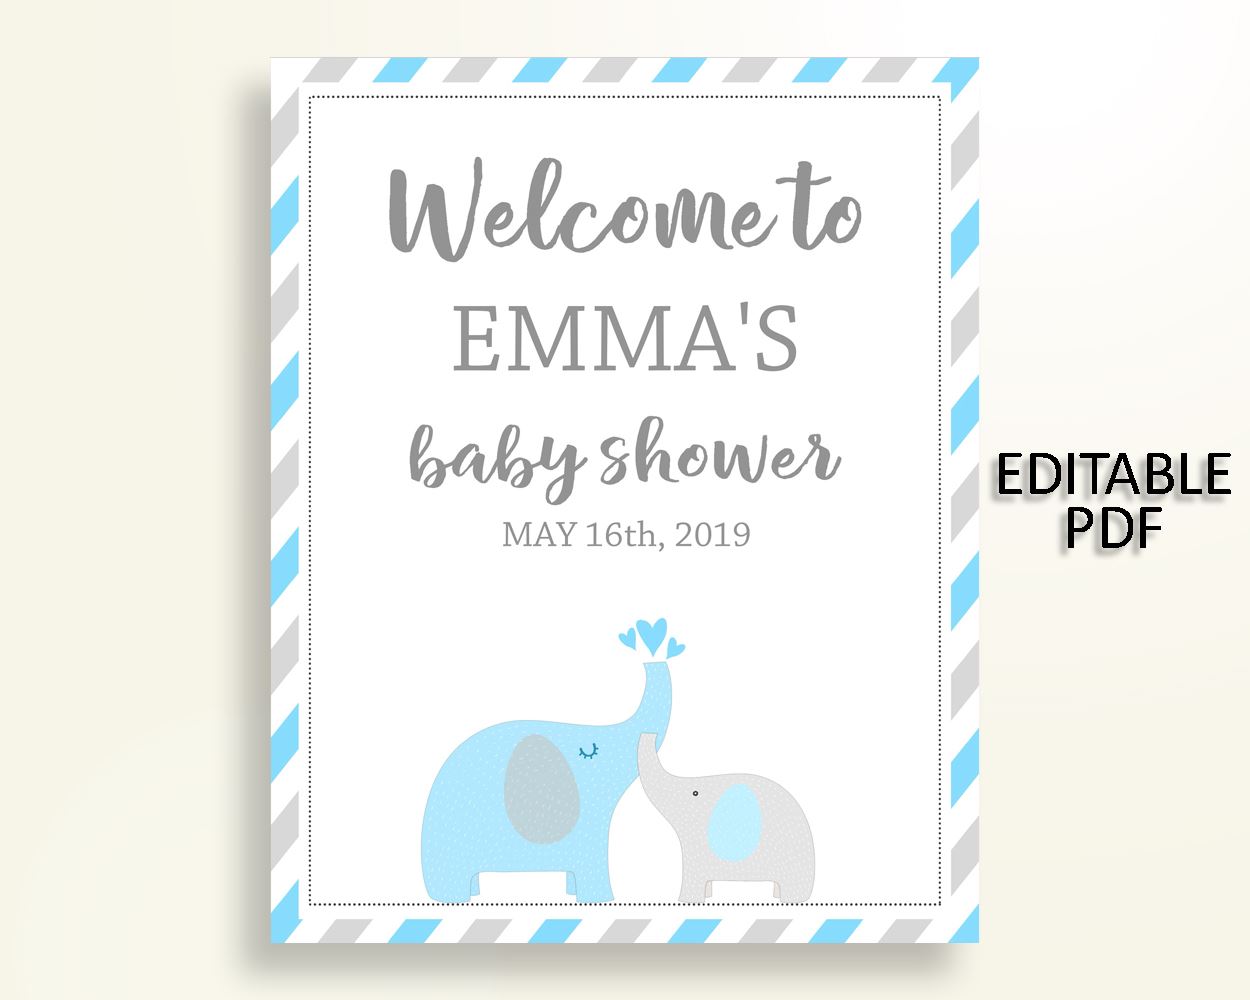 Welcome Sign Baby Shower Welcome Sign Elephant Baby Shower Welcome Sign Blue Gray Baby Shower Elephant Welcome Sign party décor C0U64 - Digital Product